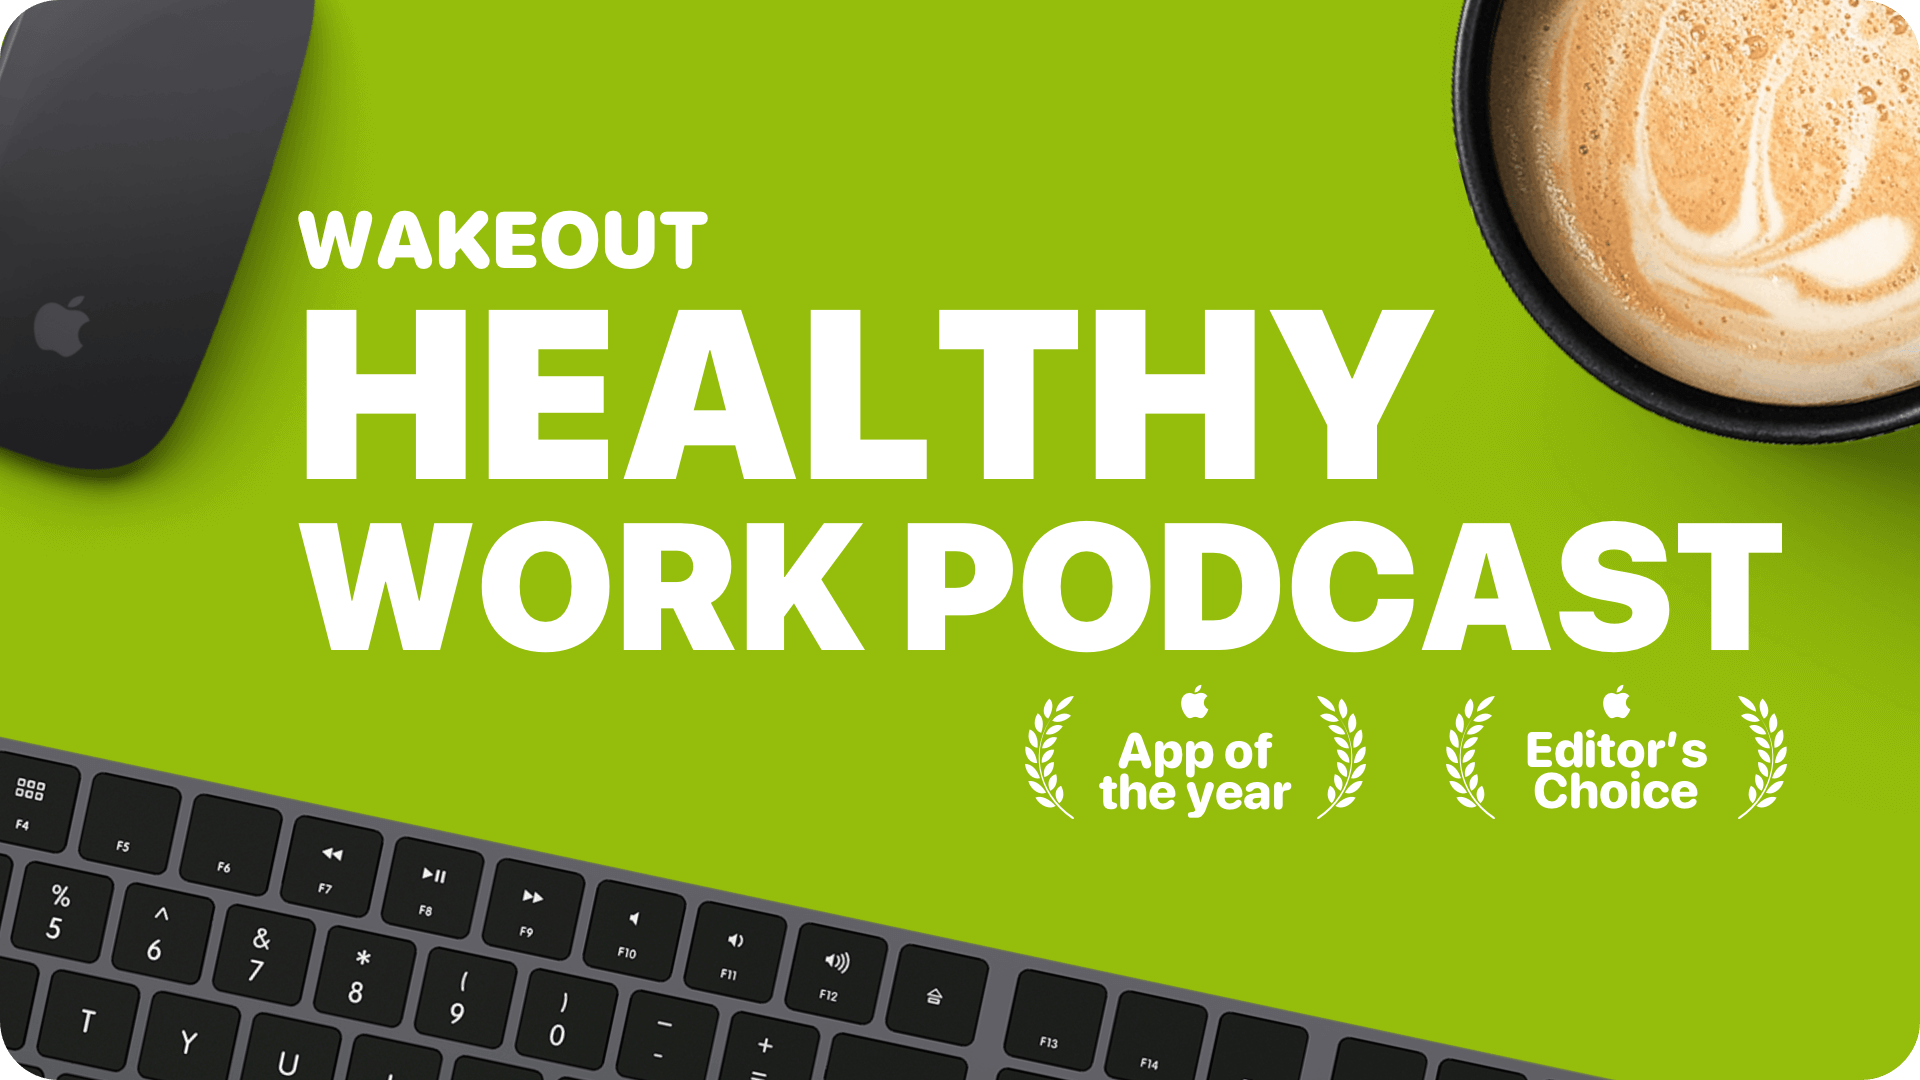 The Healthy Work Podcast by Wakeout